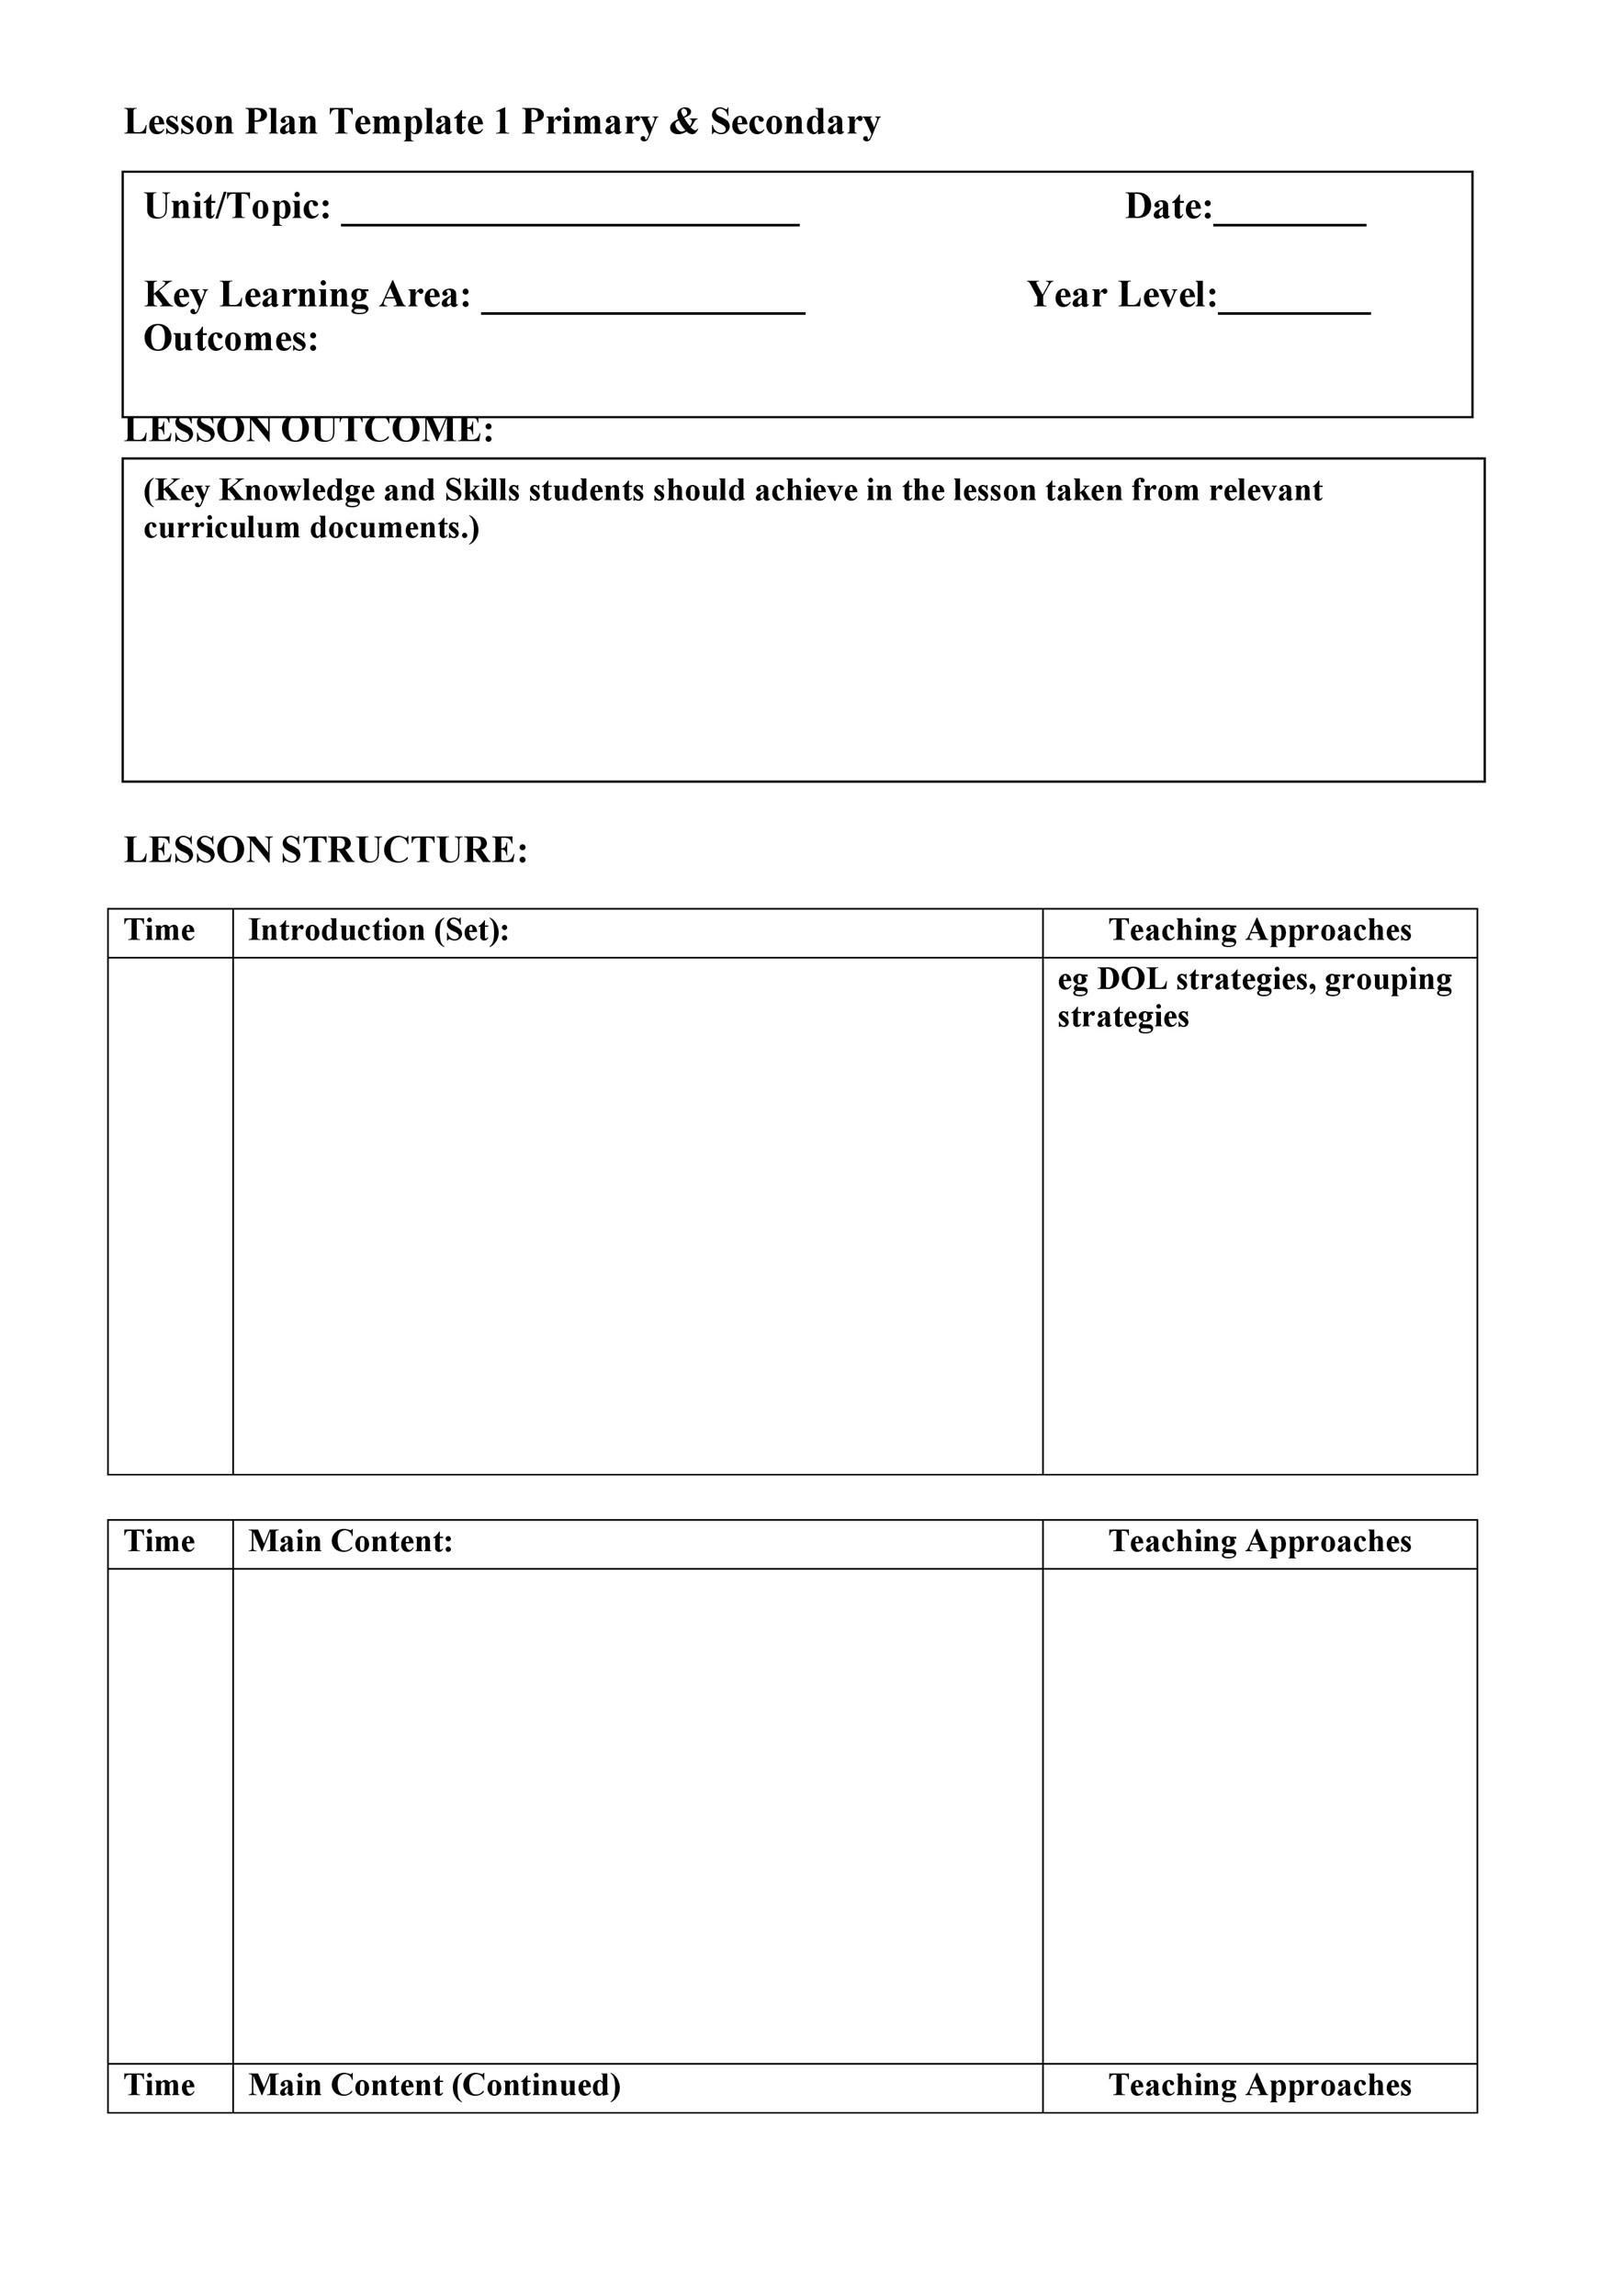 Easy Lesson Plan Template Easy Lesson Plan Template Addictionary